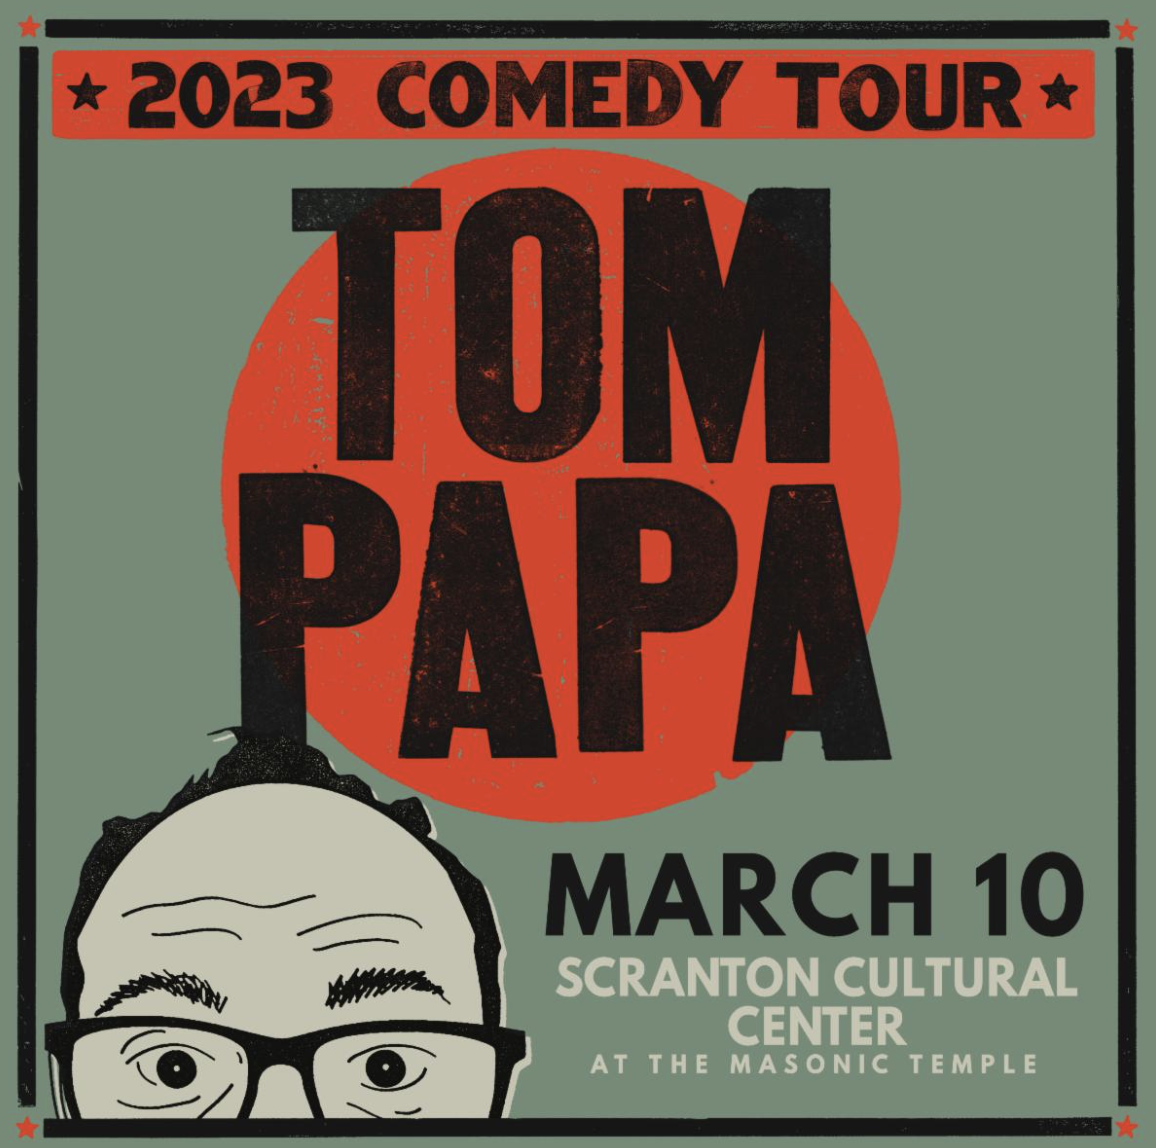 Comedy Legend Tom Papa at The Scranton Cultural Center with his 2023 Comedy Tour